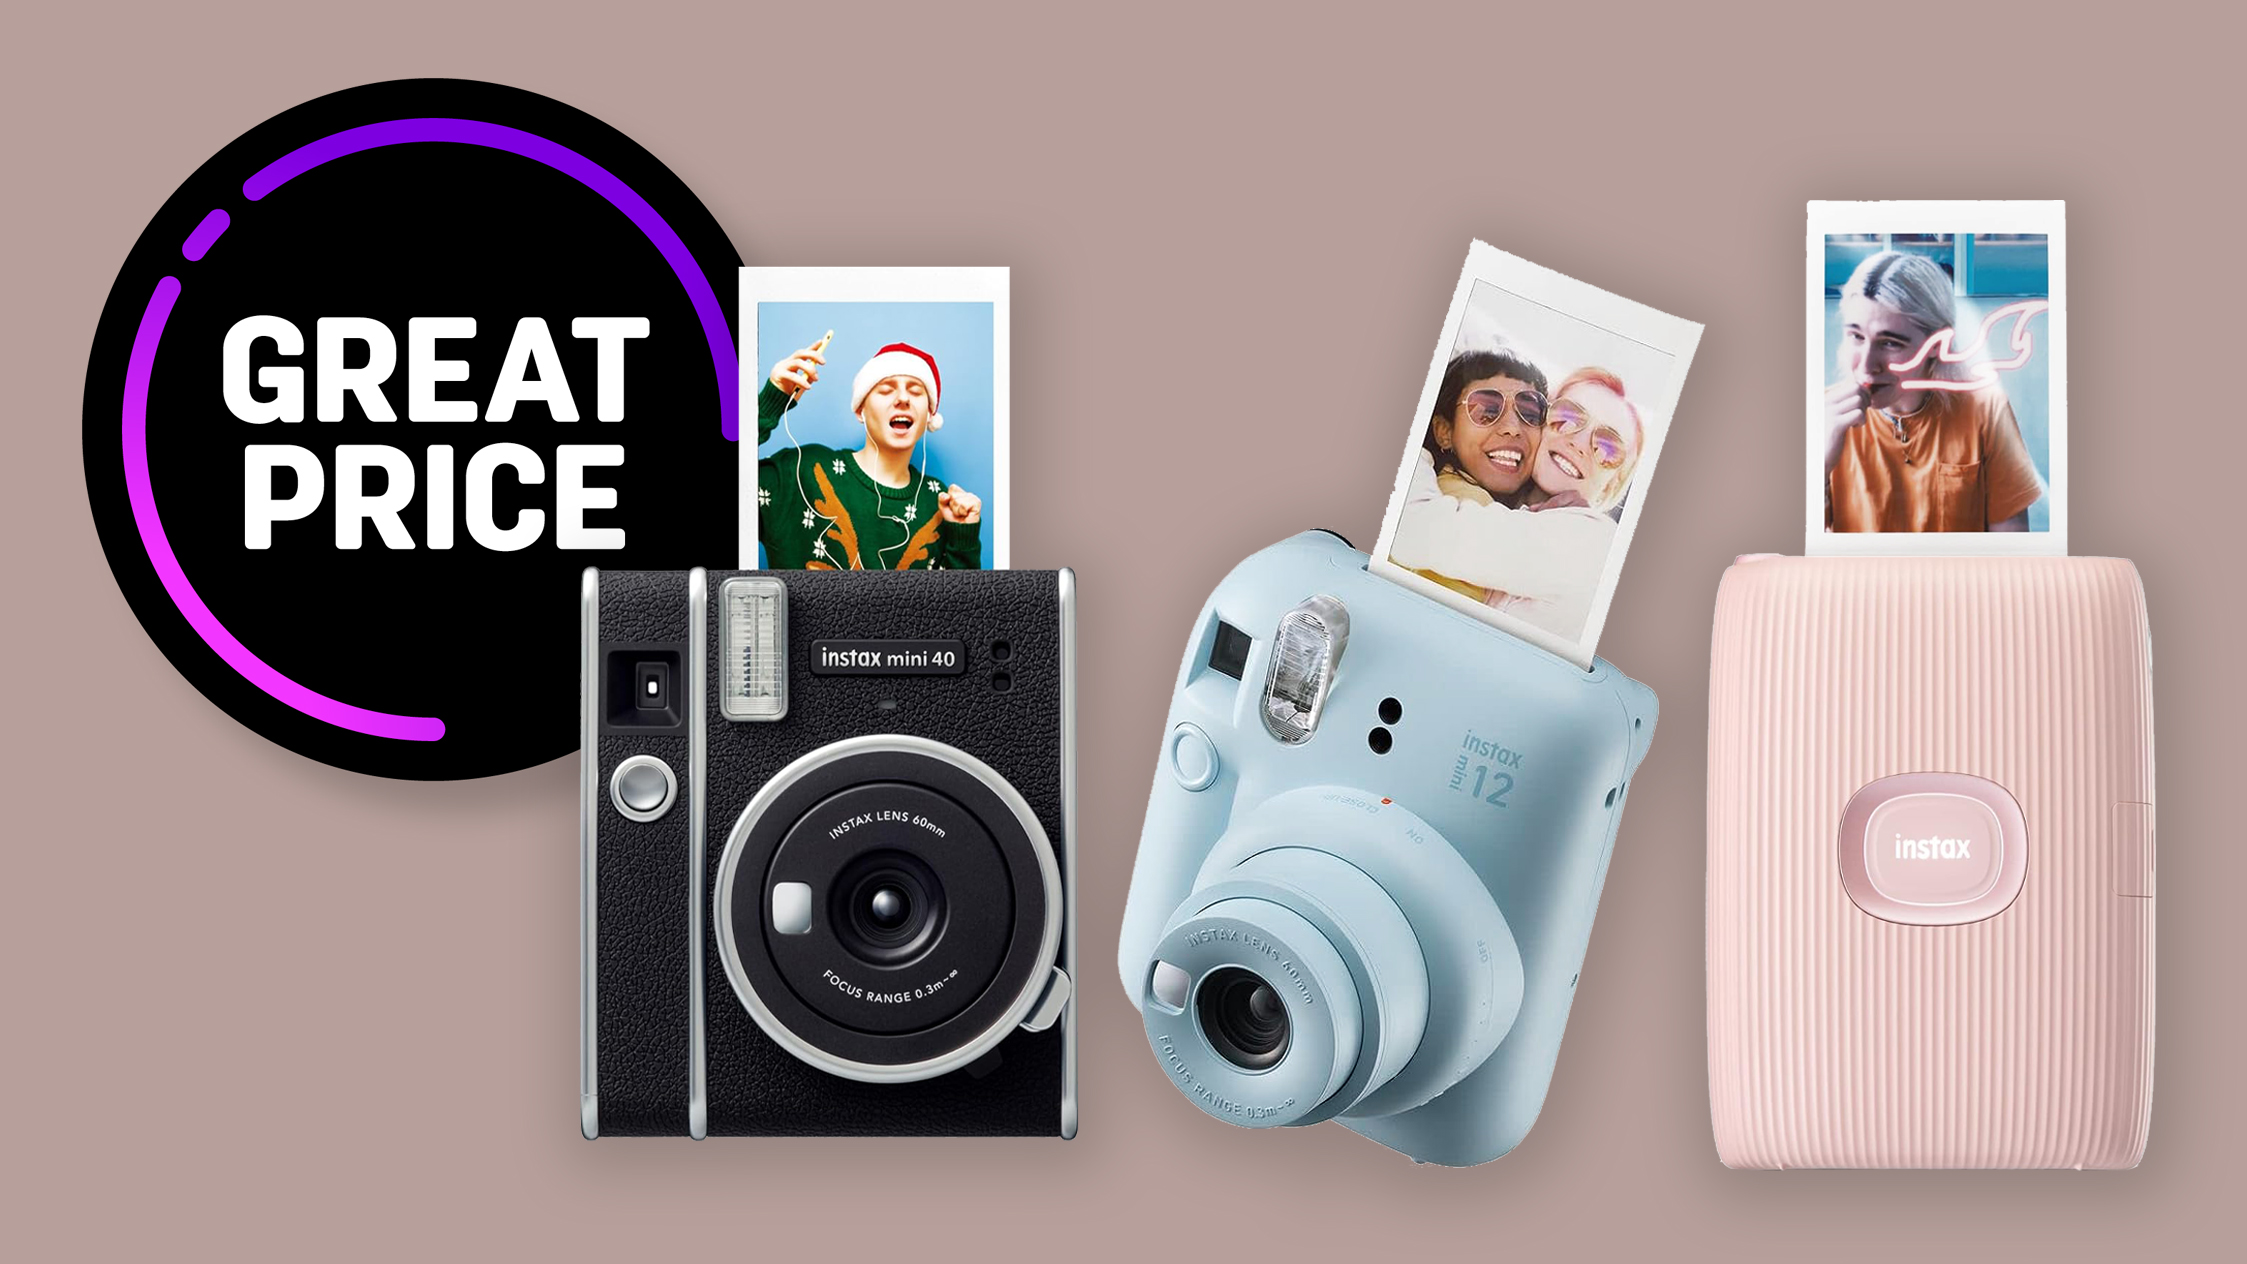 The Best Looking Instant Camera: Fujifilm Launches the Instax Mini 40